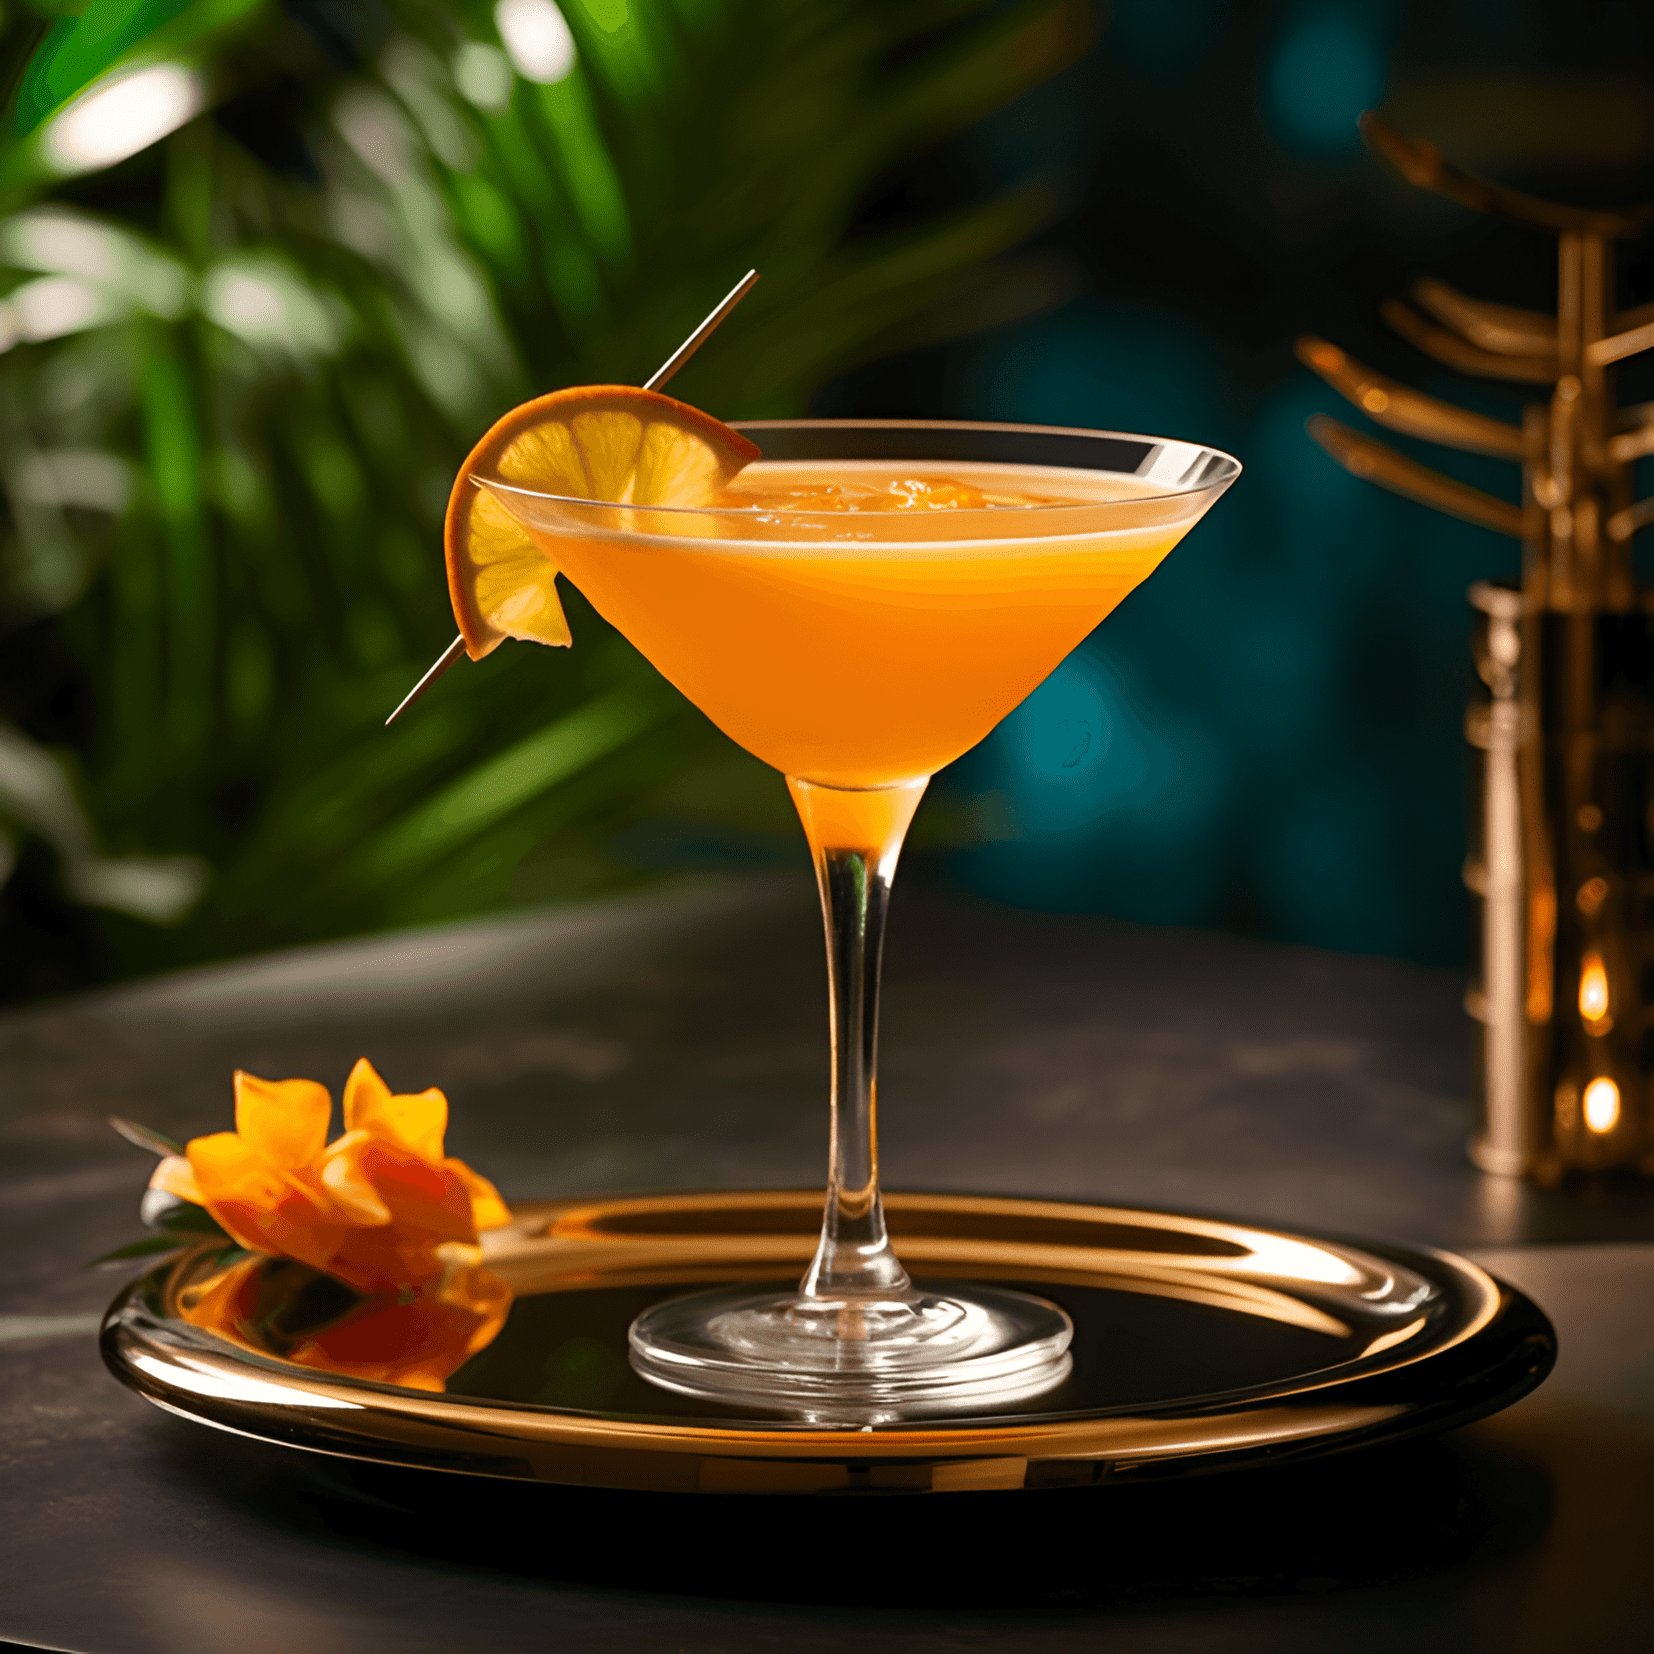 Paradise Cocktail Recipe - The Paradise cocktail has a delicate balance of sweet, sour, and fruity flavors. The gin provides a strong, herbal base, while the apricot brandy adds a touch of sweetness. The fresh orange and lemon juices bring a bright, citrusy tang to the drink, making it light and refreshing.